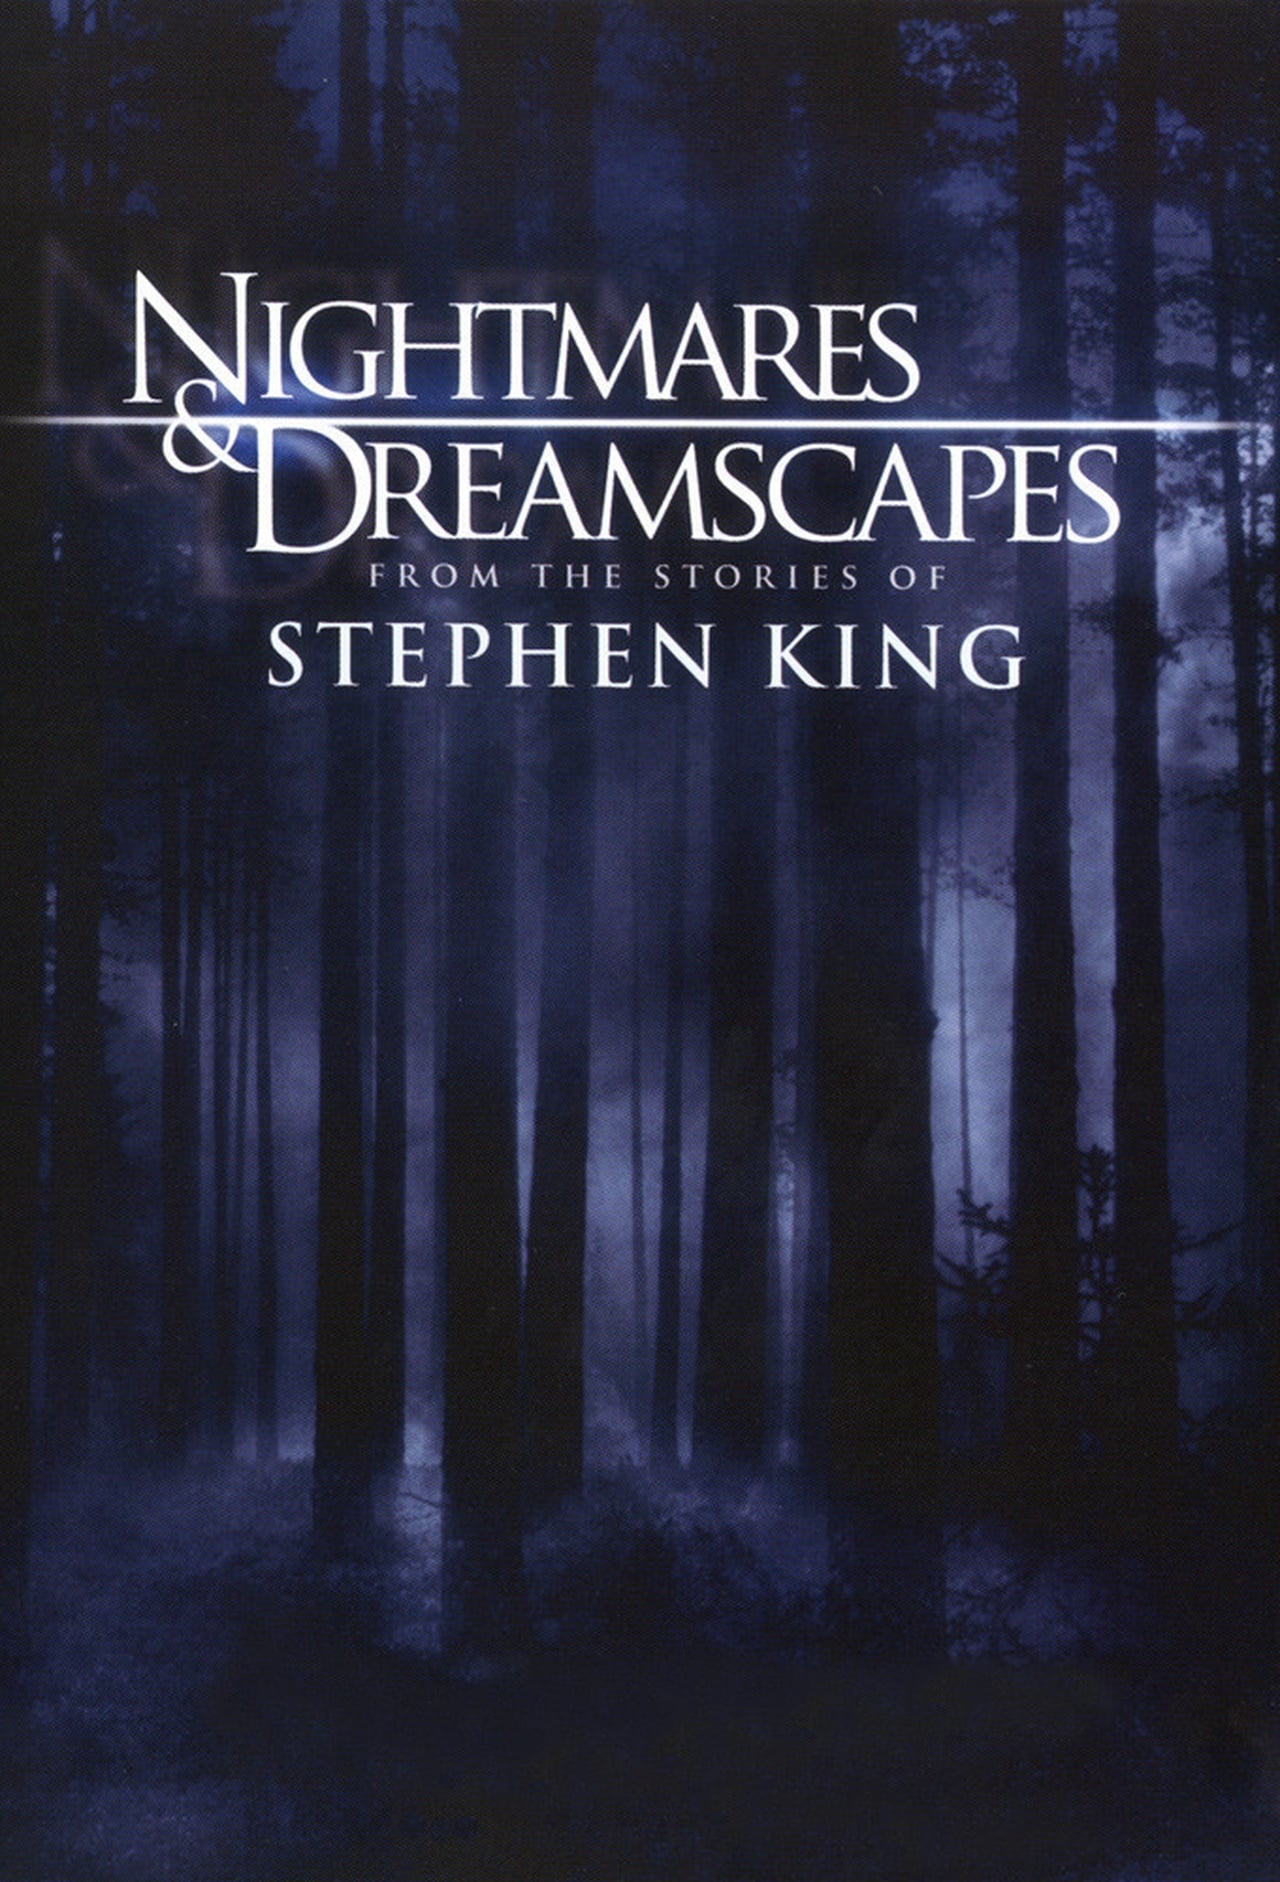 Nightmares & Dreamscapes: From The Stories Of Stephen King (2006)